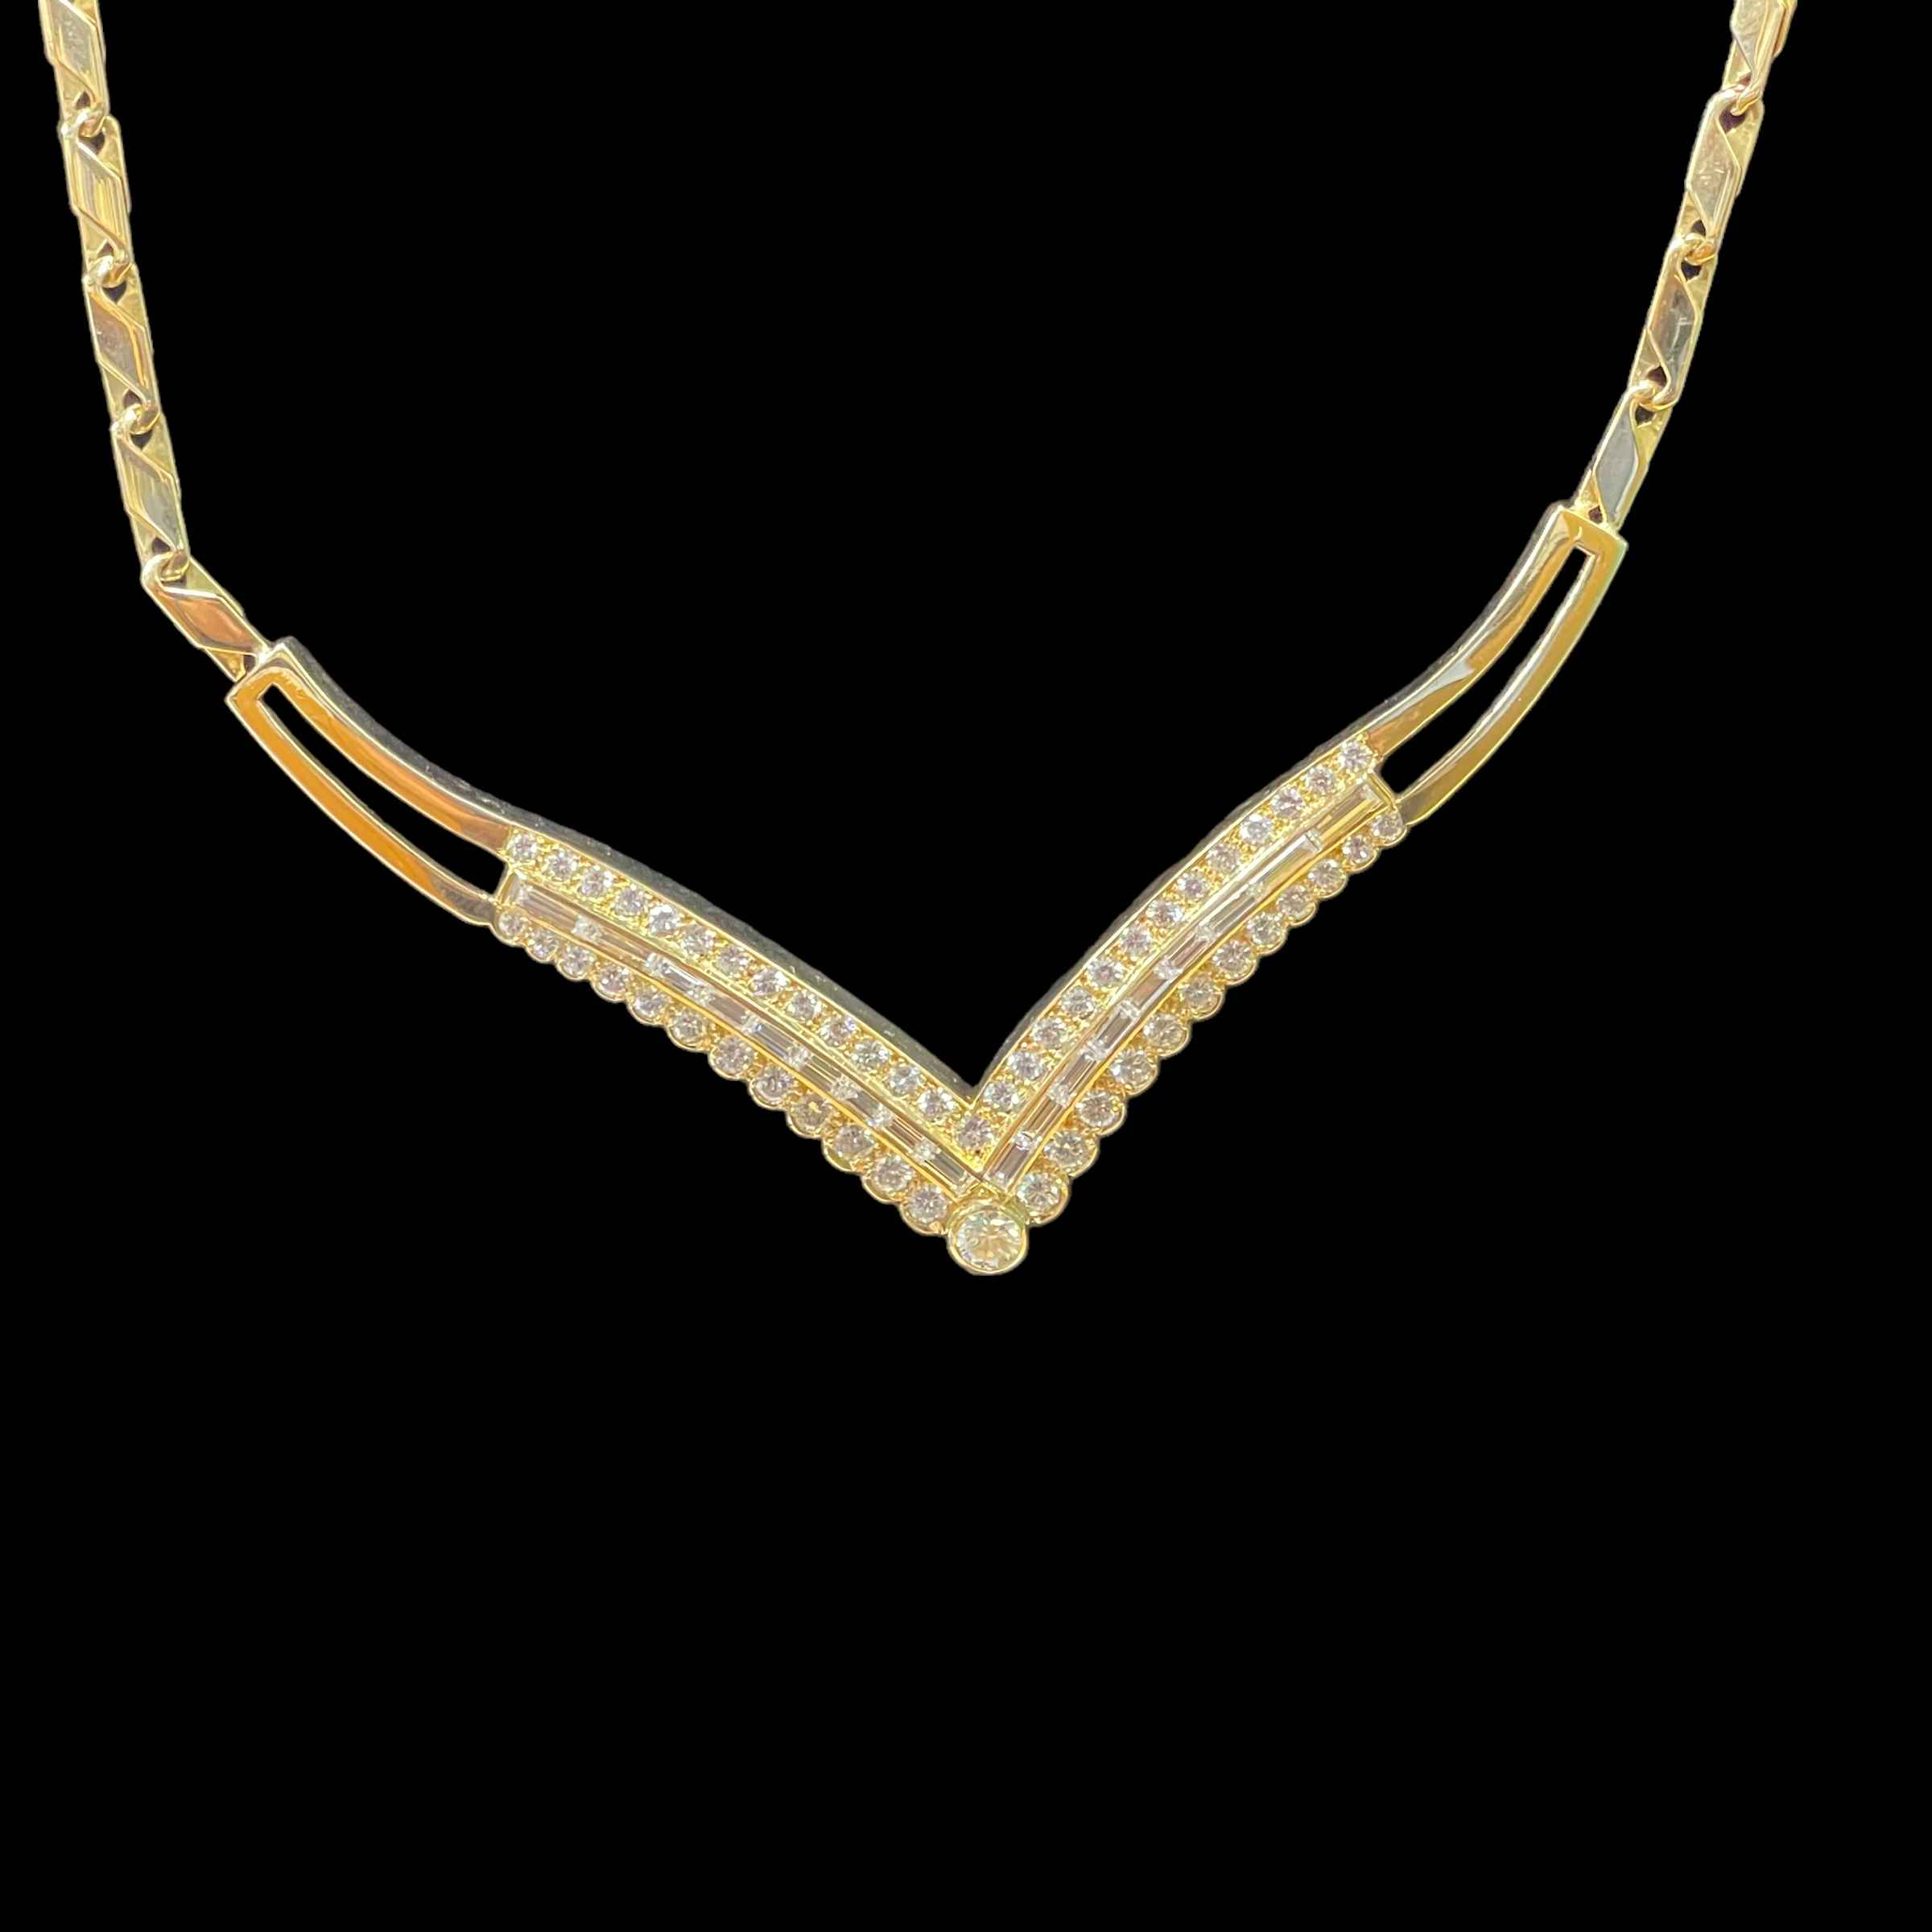 18 carat yellow gold V-shaped diamond pendant necklace to match previous bracelet (Lot 153) with a